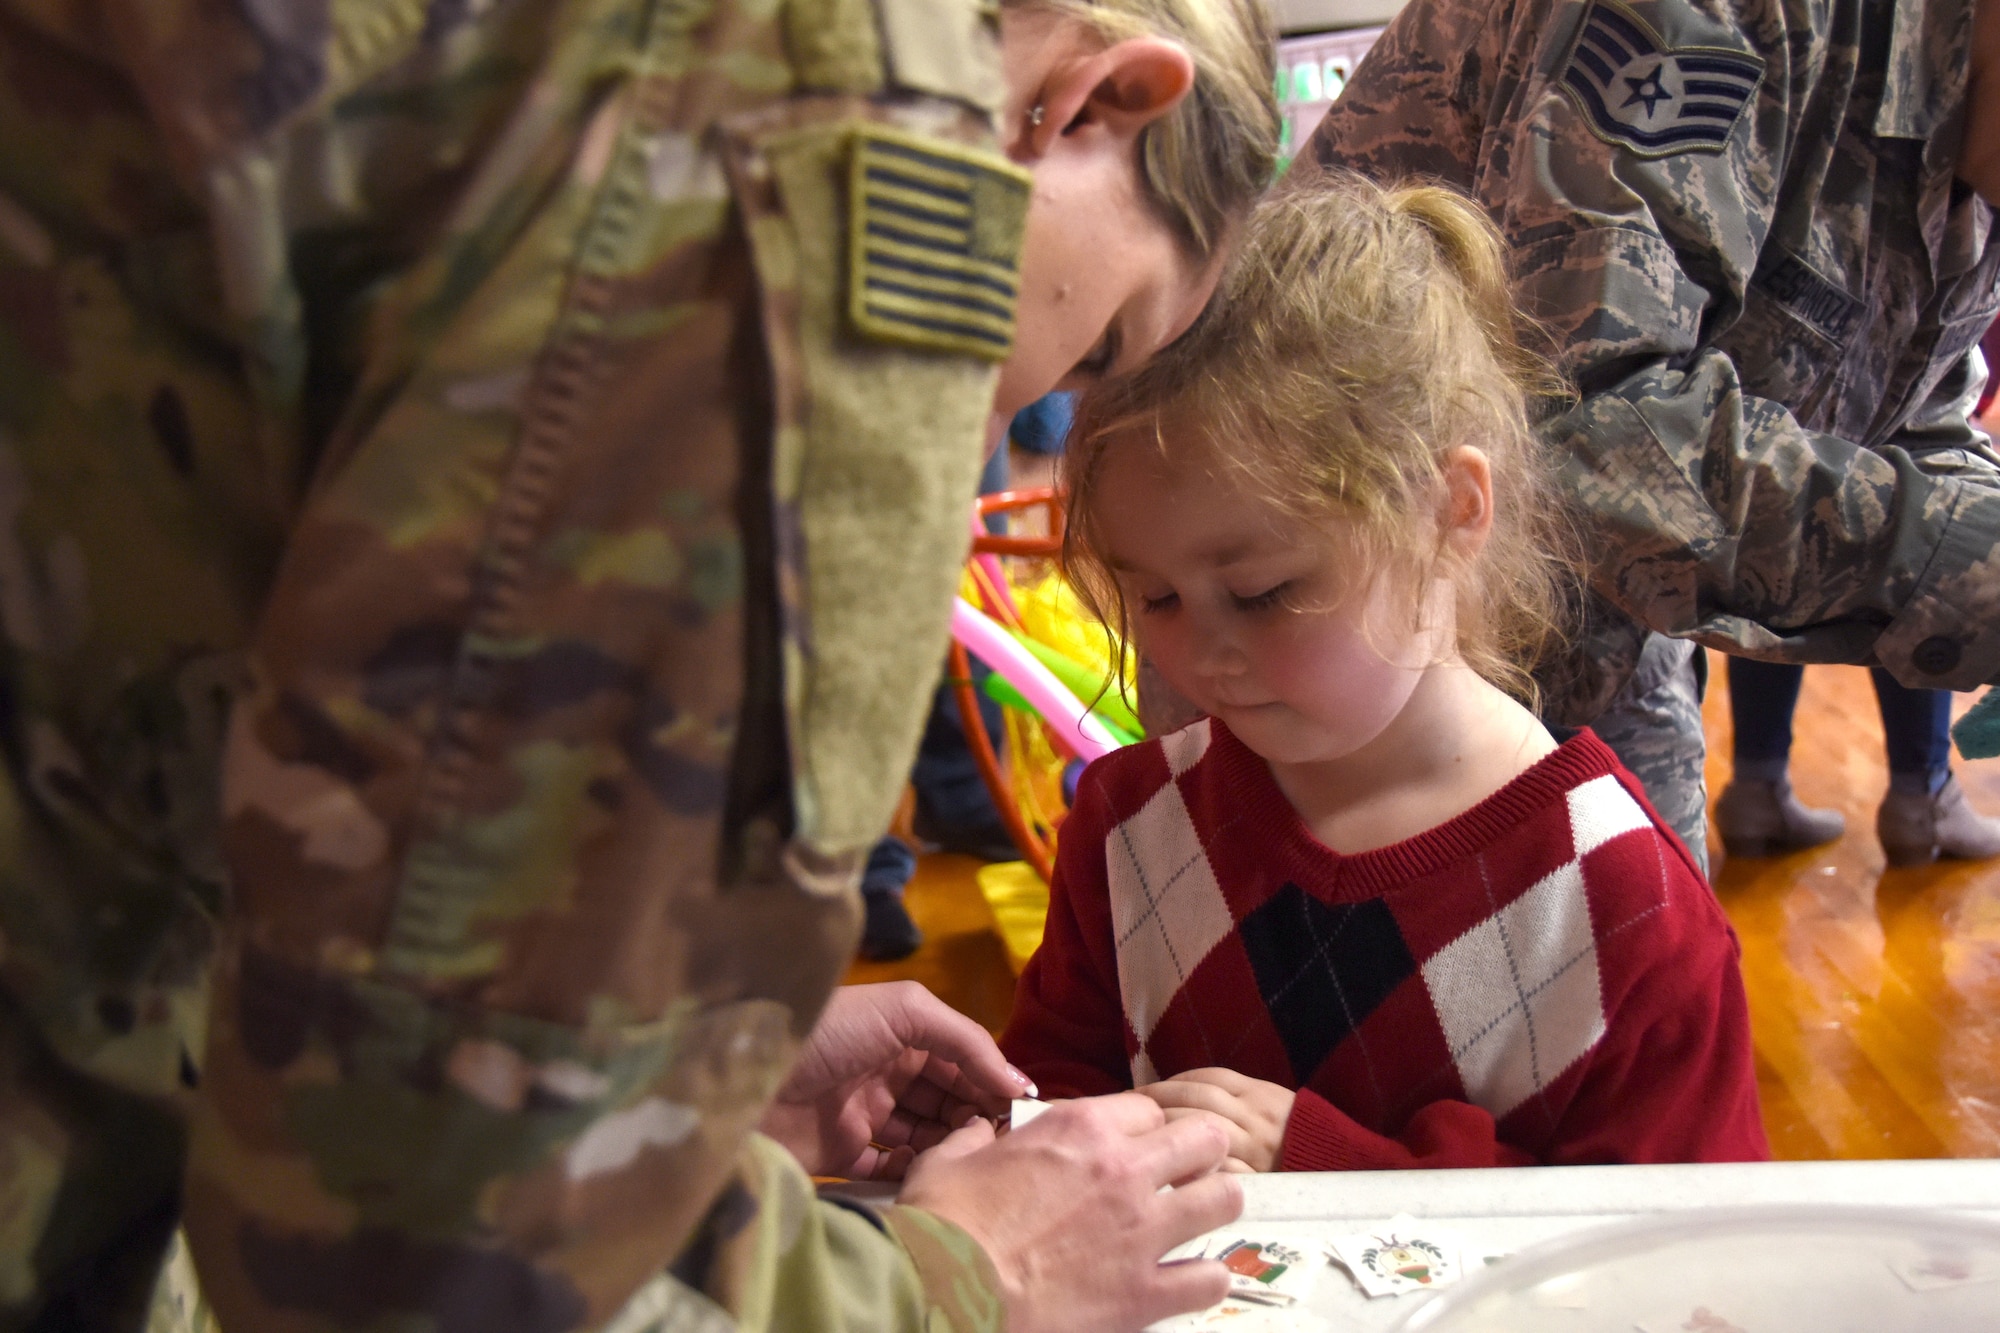 A young student of Badin Elementary School (B.E.S.) selects a temporary hand tattoo during Operation Santa held at B.E.S., Badin, N.C., Dec. 14th, 2019.  Operation Santa is an annual event run by the Chapter 7 organization of the North Carolina Air National Guard (NCANG) which chooses select schools to provide assistance to families during the holiday season. This year, the NCANG provided presents, lunch, music, bouncy castles and a Santa. The NCANG also partnered with the local Target for food donations.